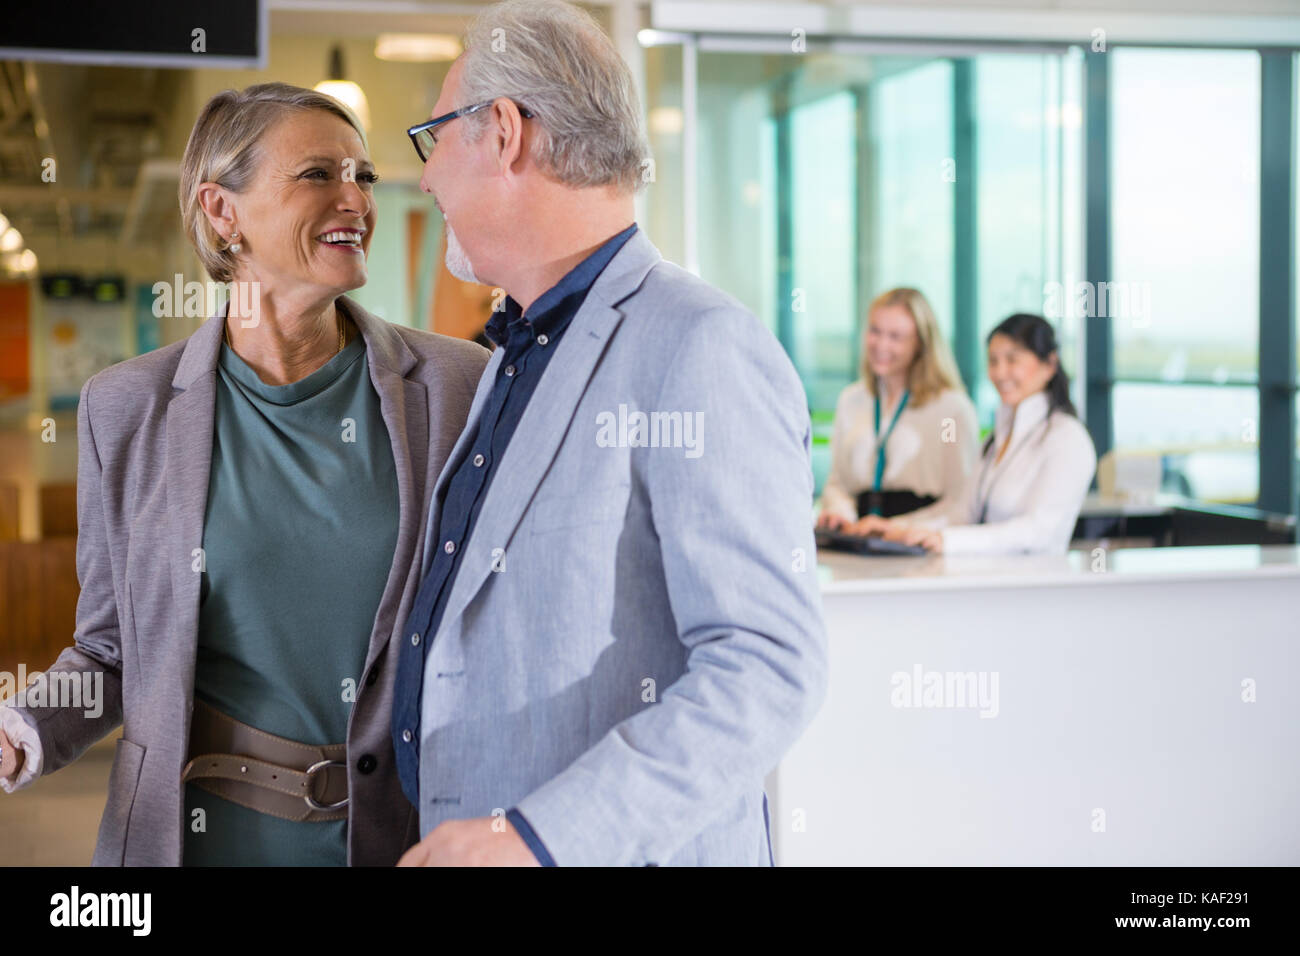 Smiling Business Couple Looking At Each Other In Airport Stock Photo